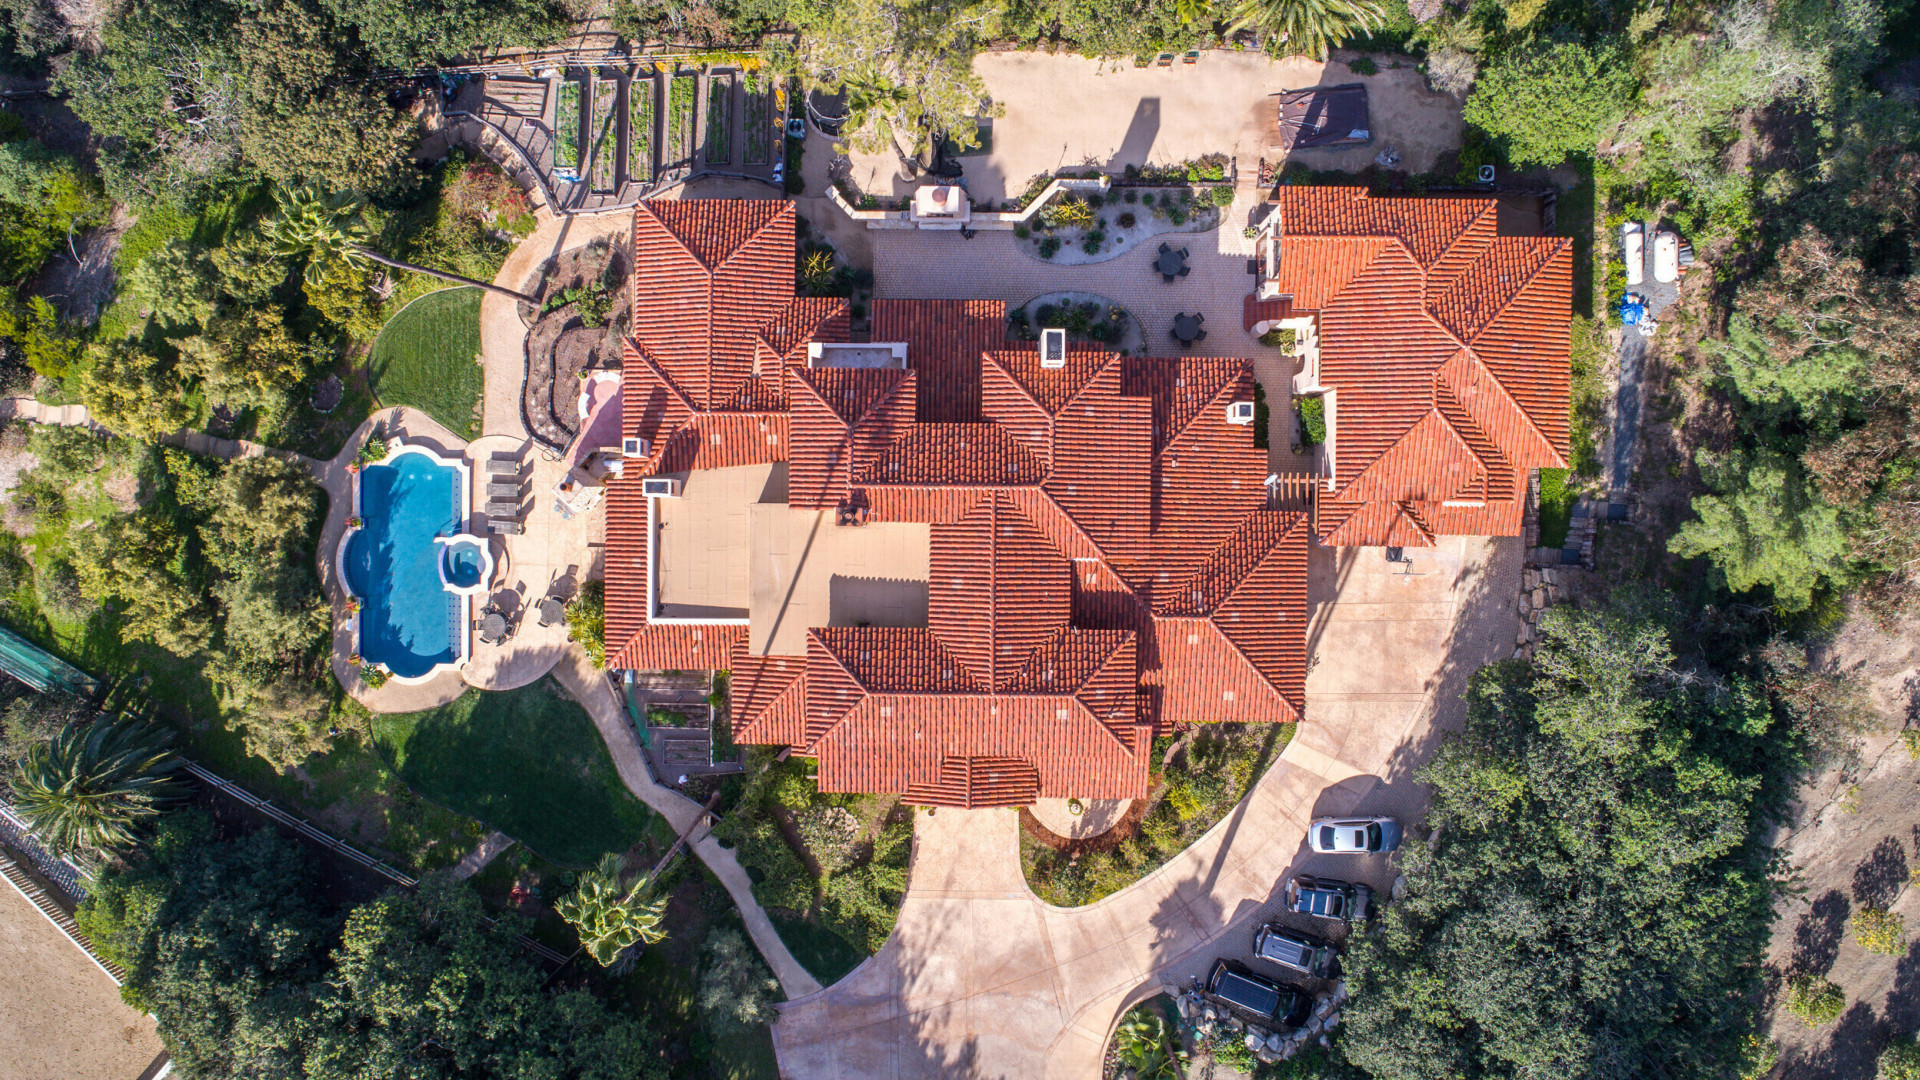 Aerial view of luxury custom home lined with plants and trees, Rancho Santa Fe CA